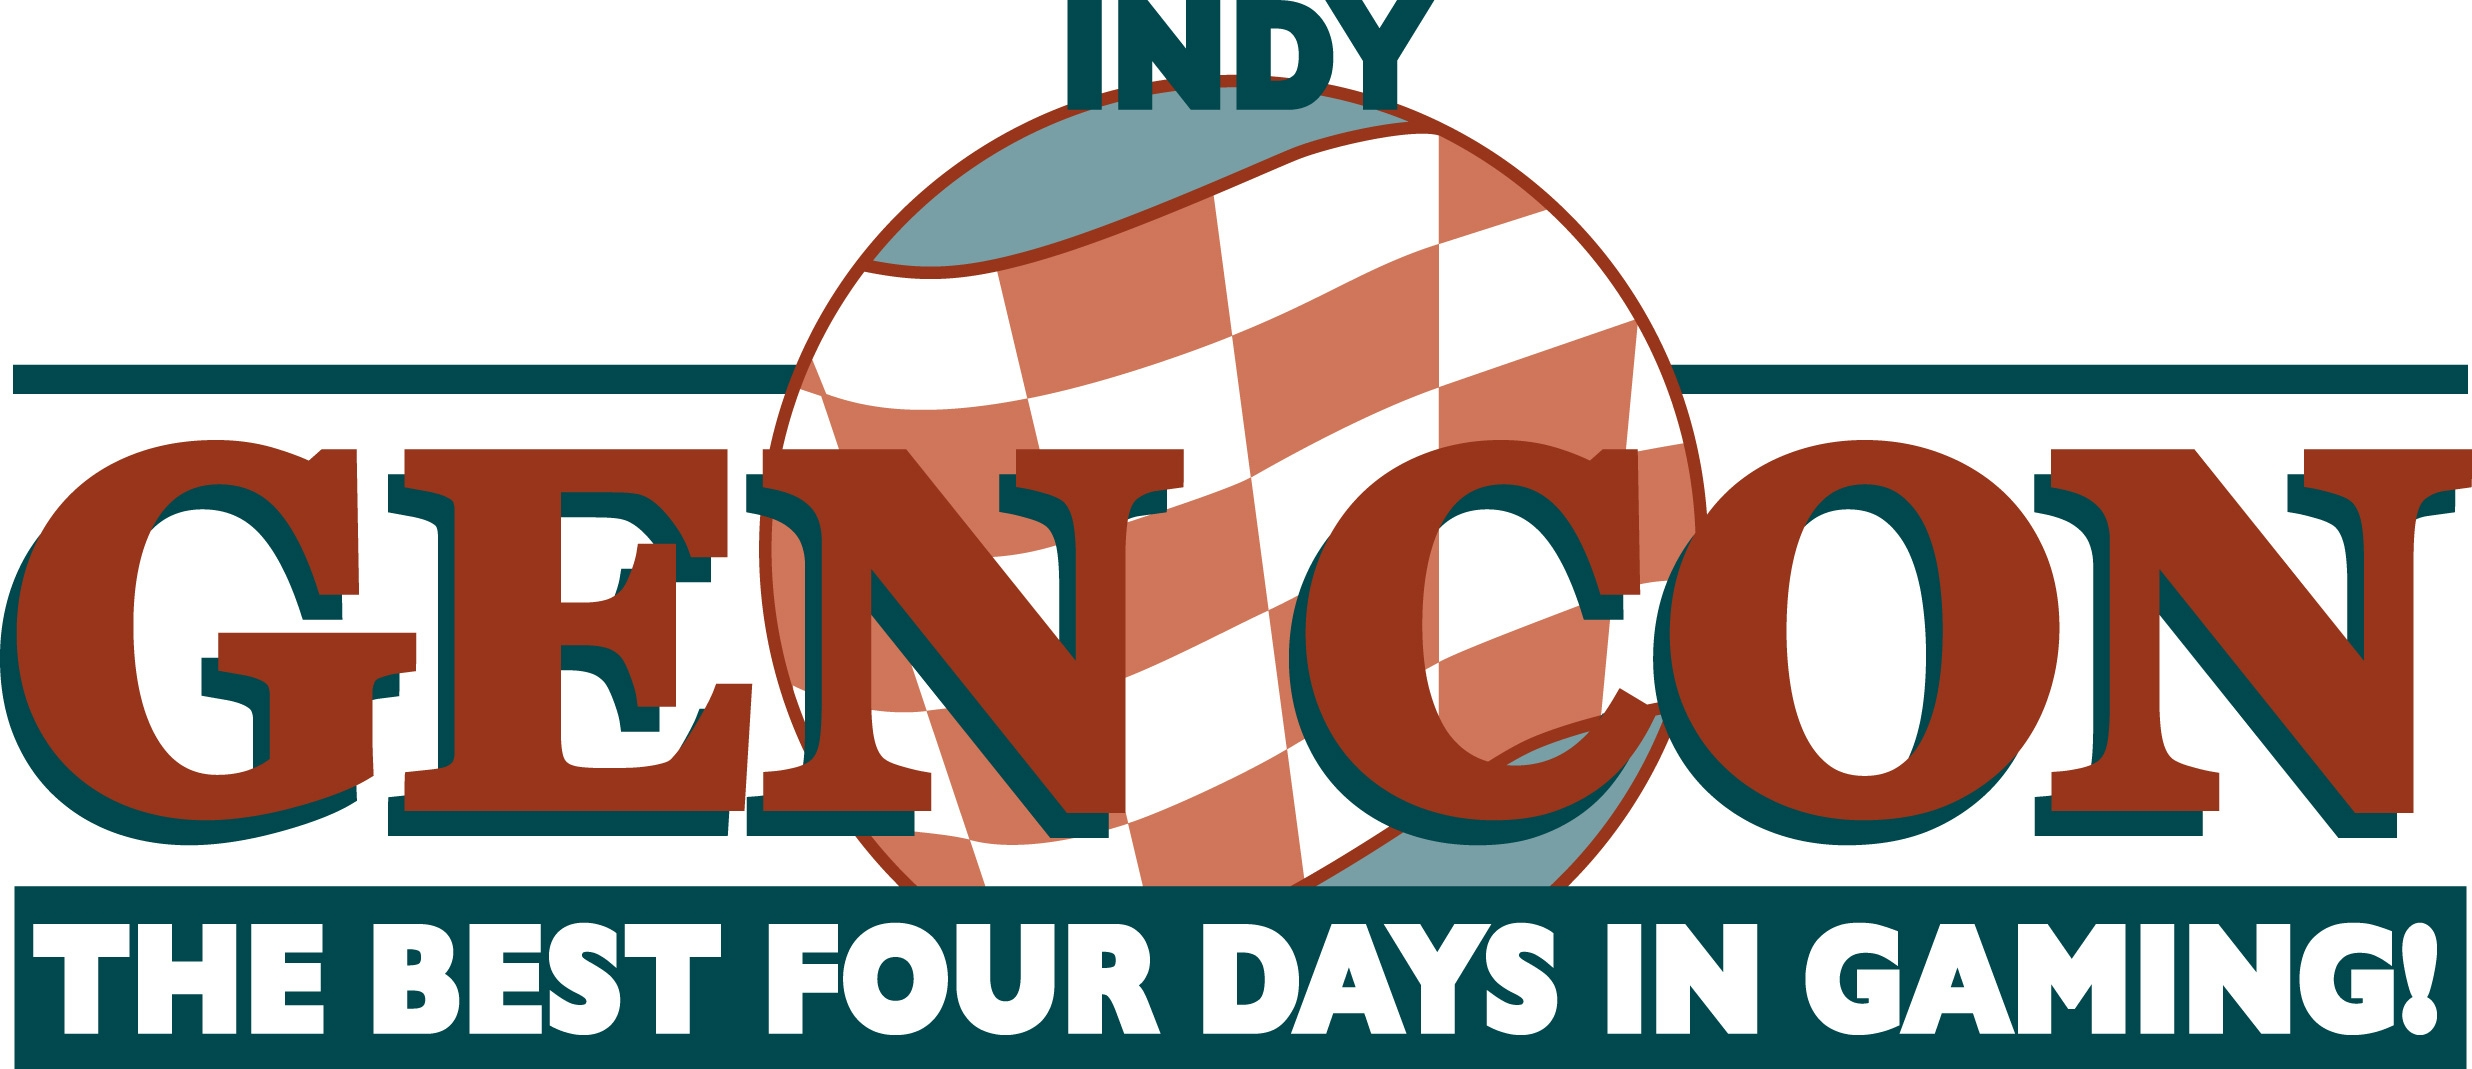 Indiana 'Religious Freedom' Bill Passes Gen Con Moving | The Mary Sue2472 x 1069